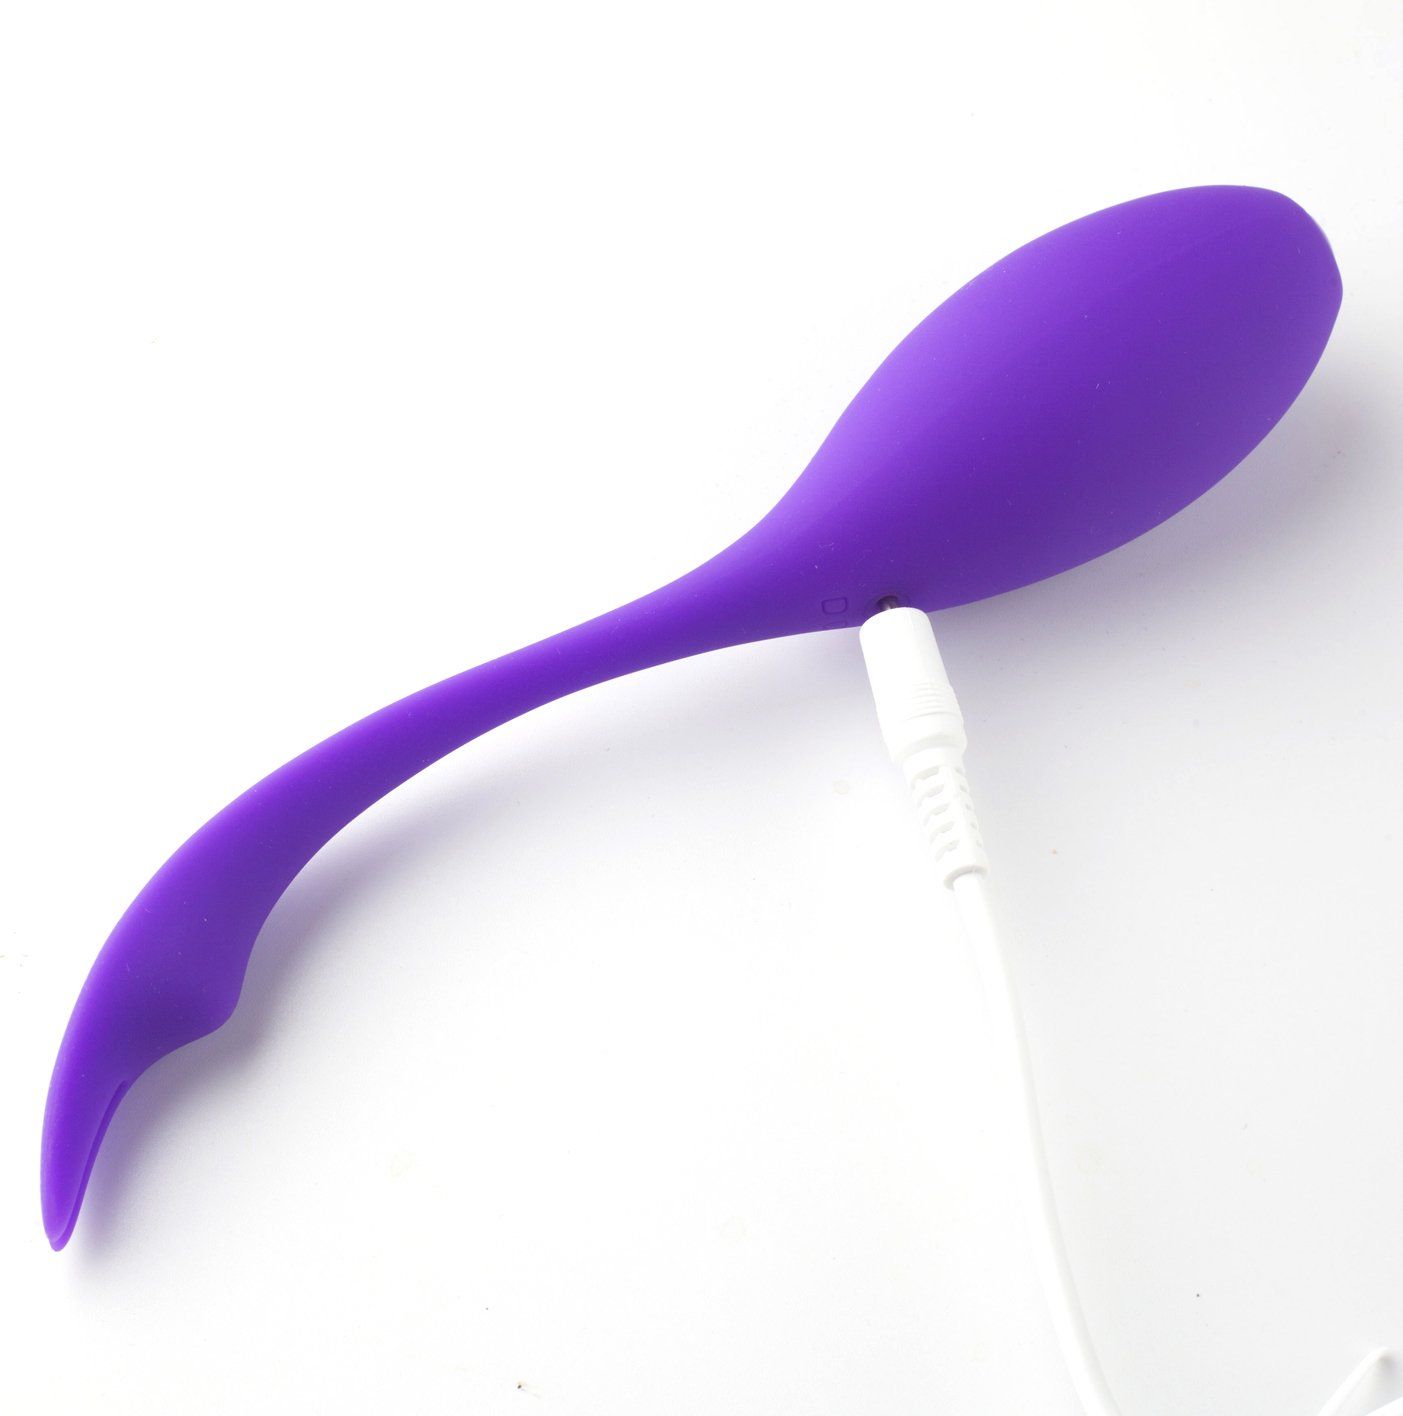 Maia syrene - remote controlled vibrator - Product side view  | Flirtybay.com.au